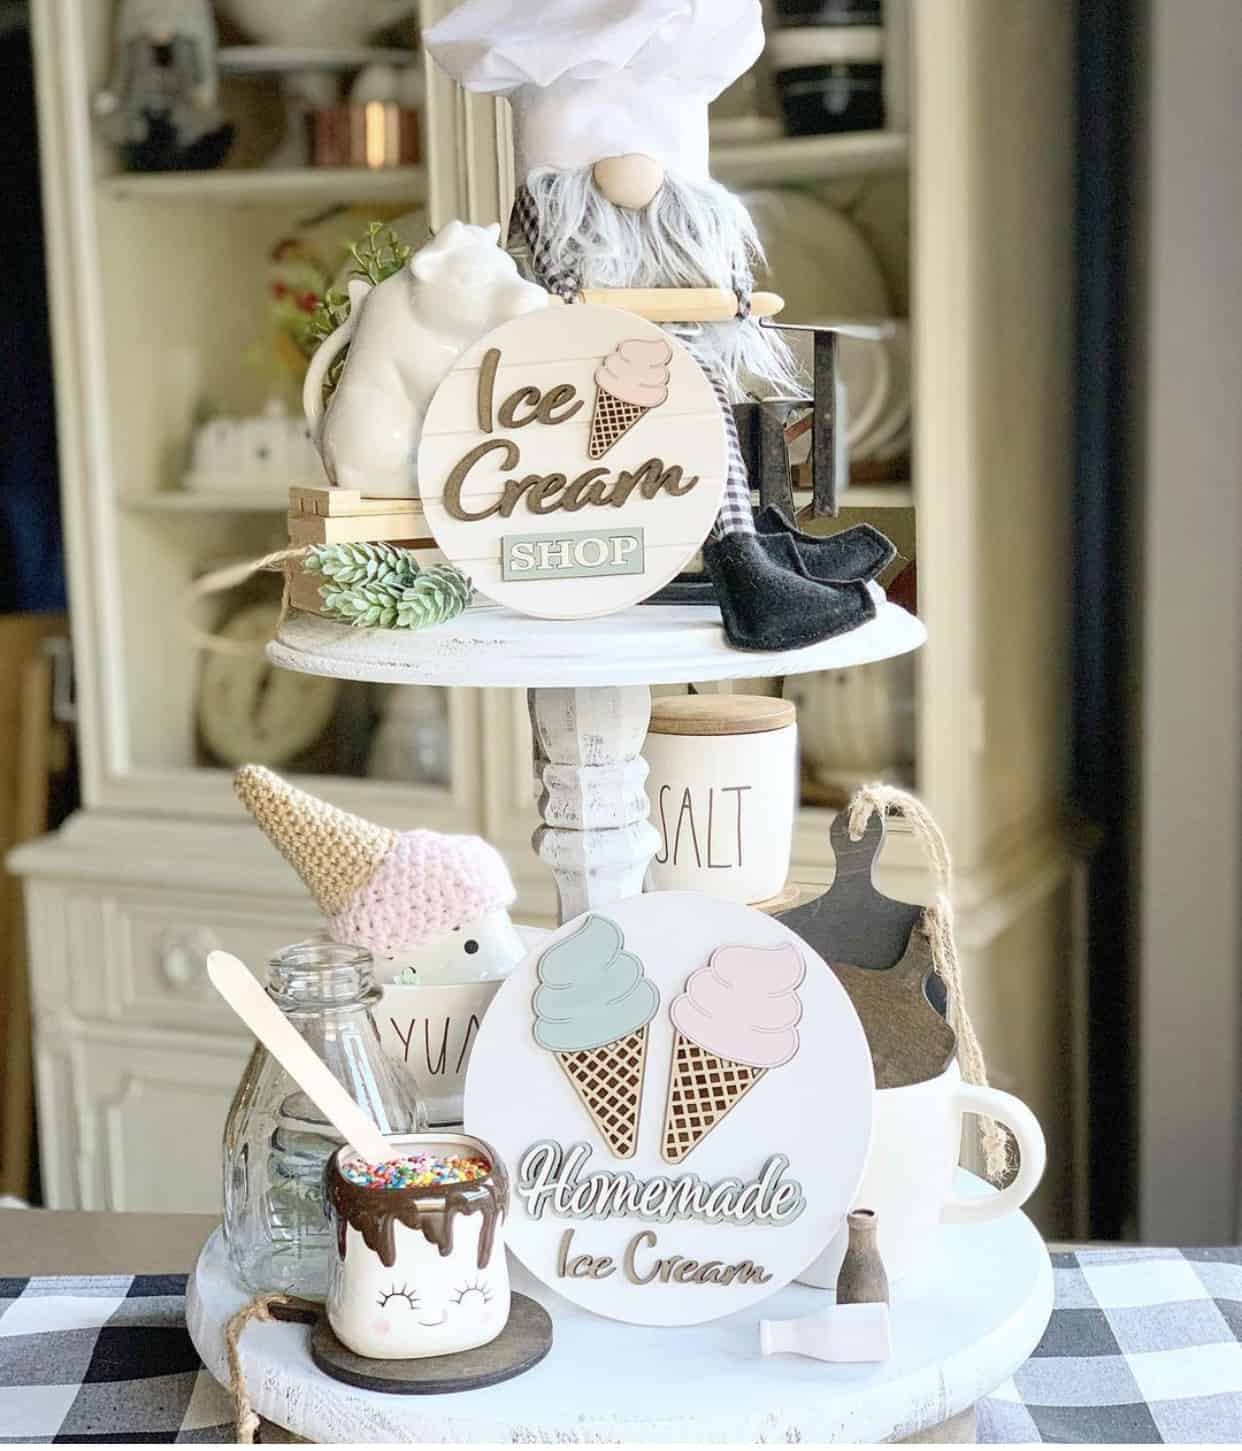 2-tiered tray with ice cream vignette. Pastry chef figure, ice cream signs and pastel color theme.